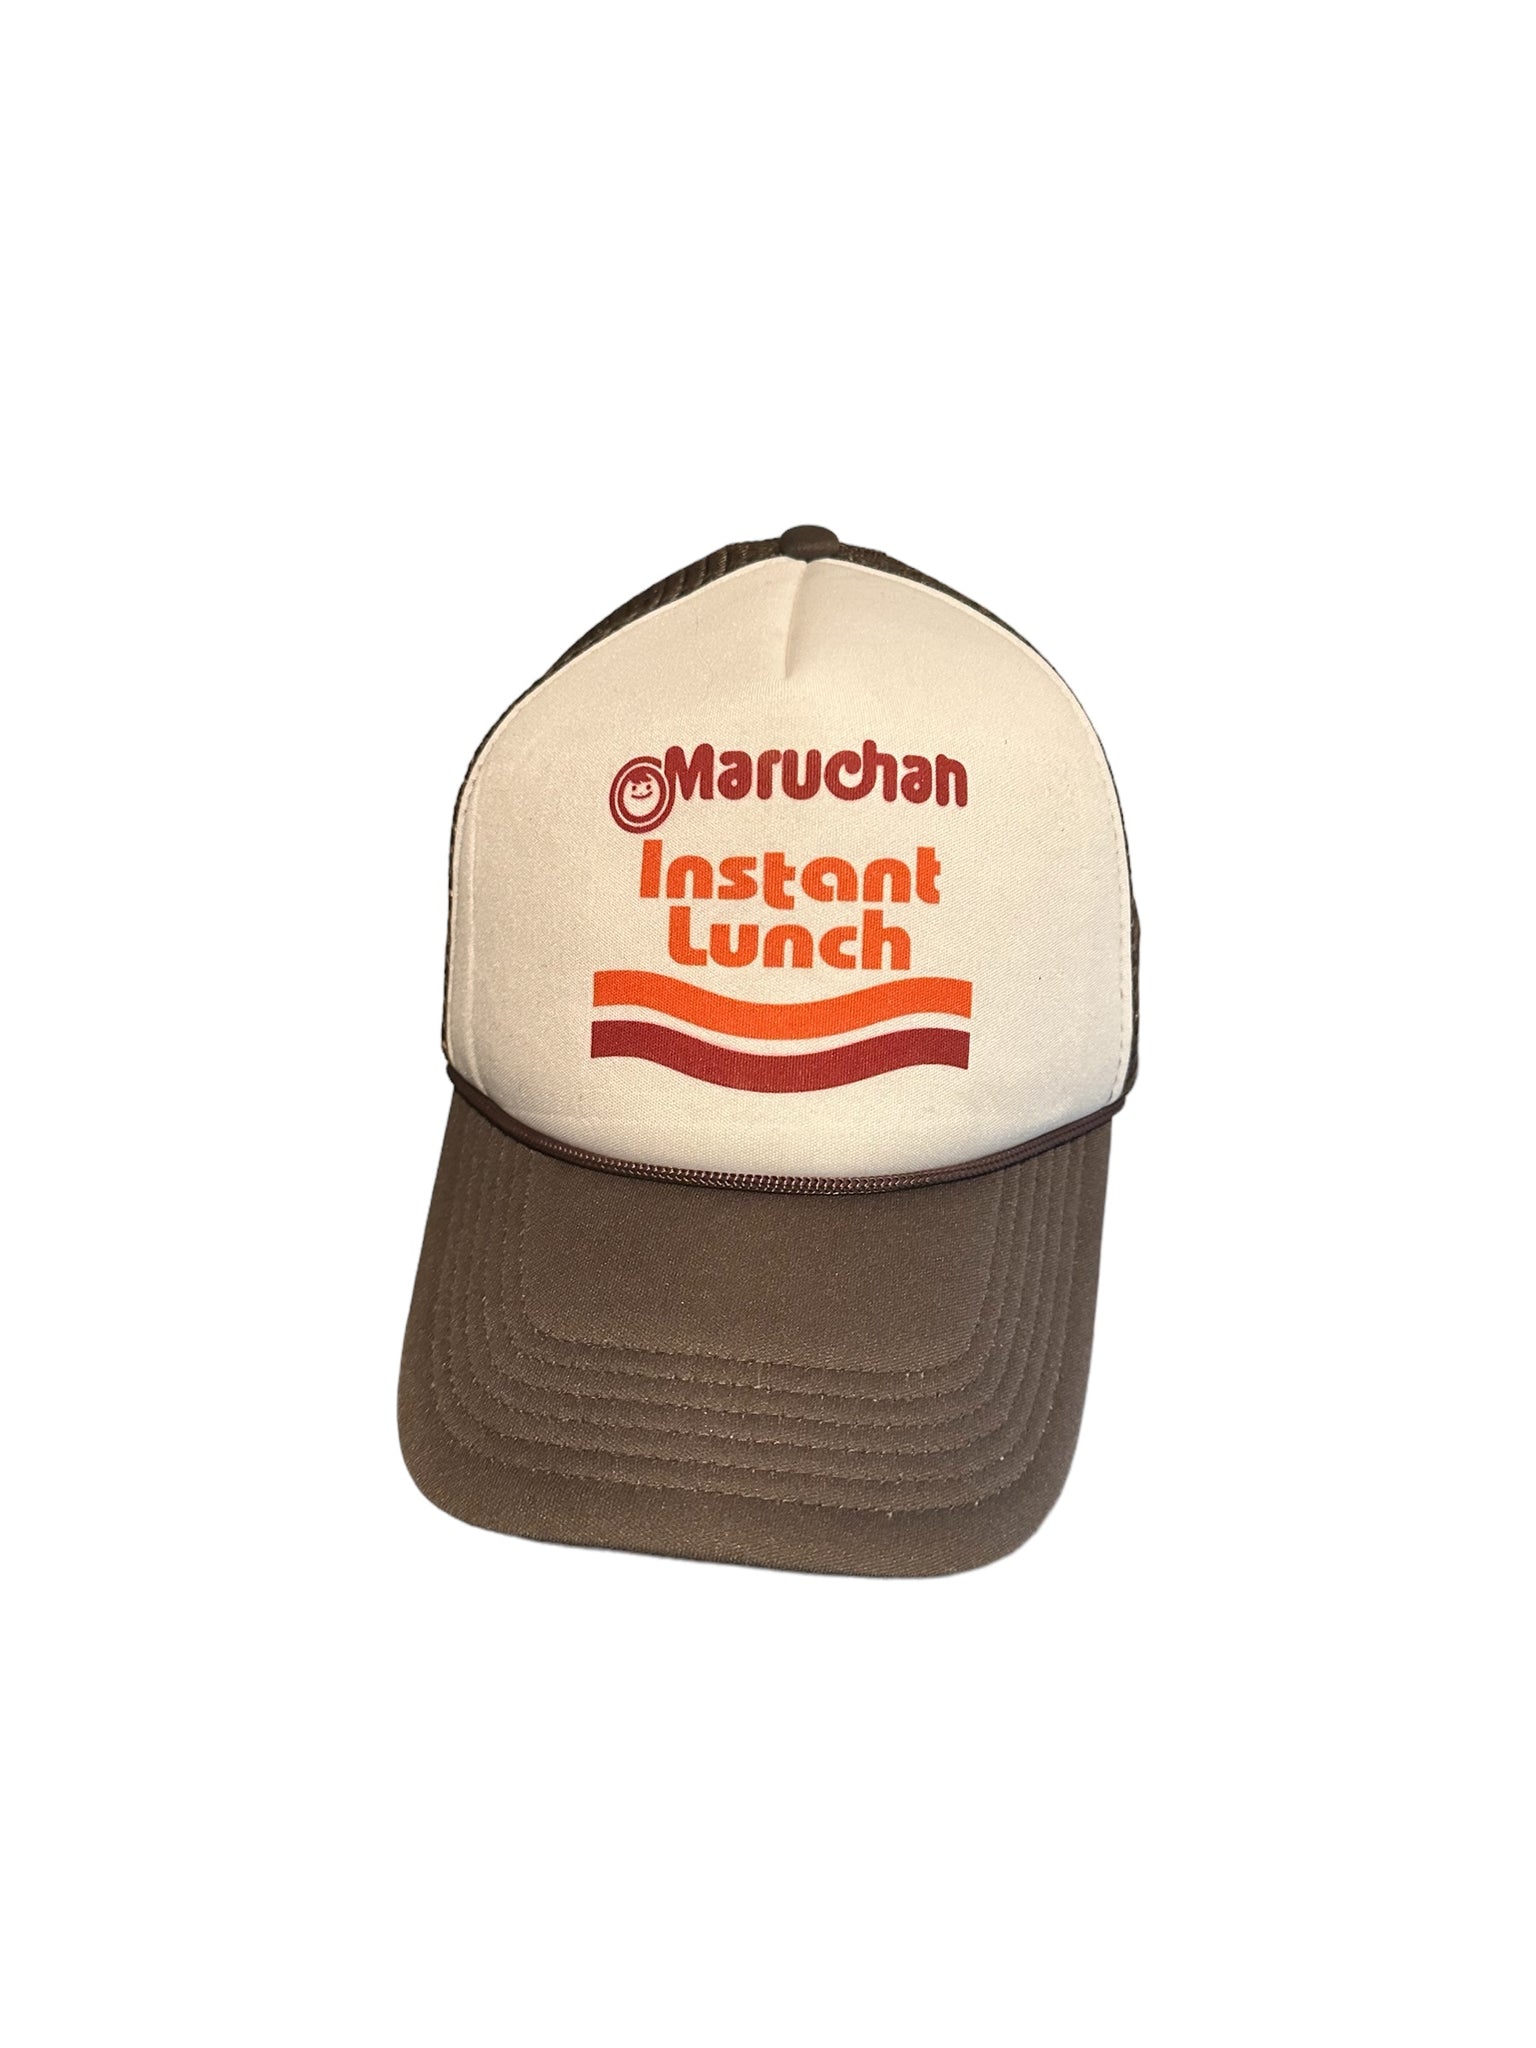 Maruchan instant lunch brown and white trucker hat snapback